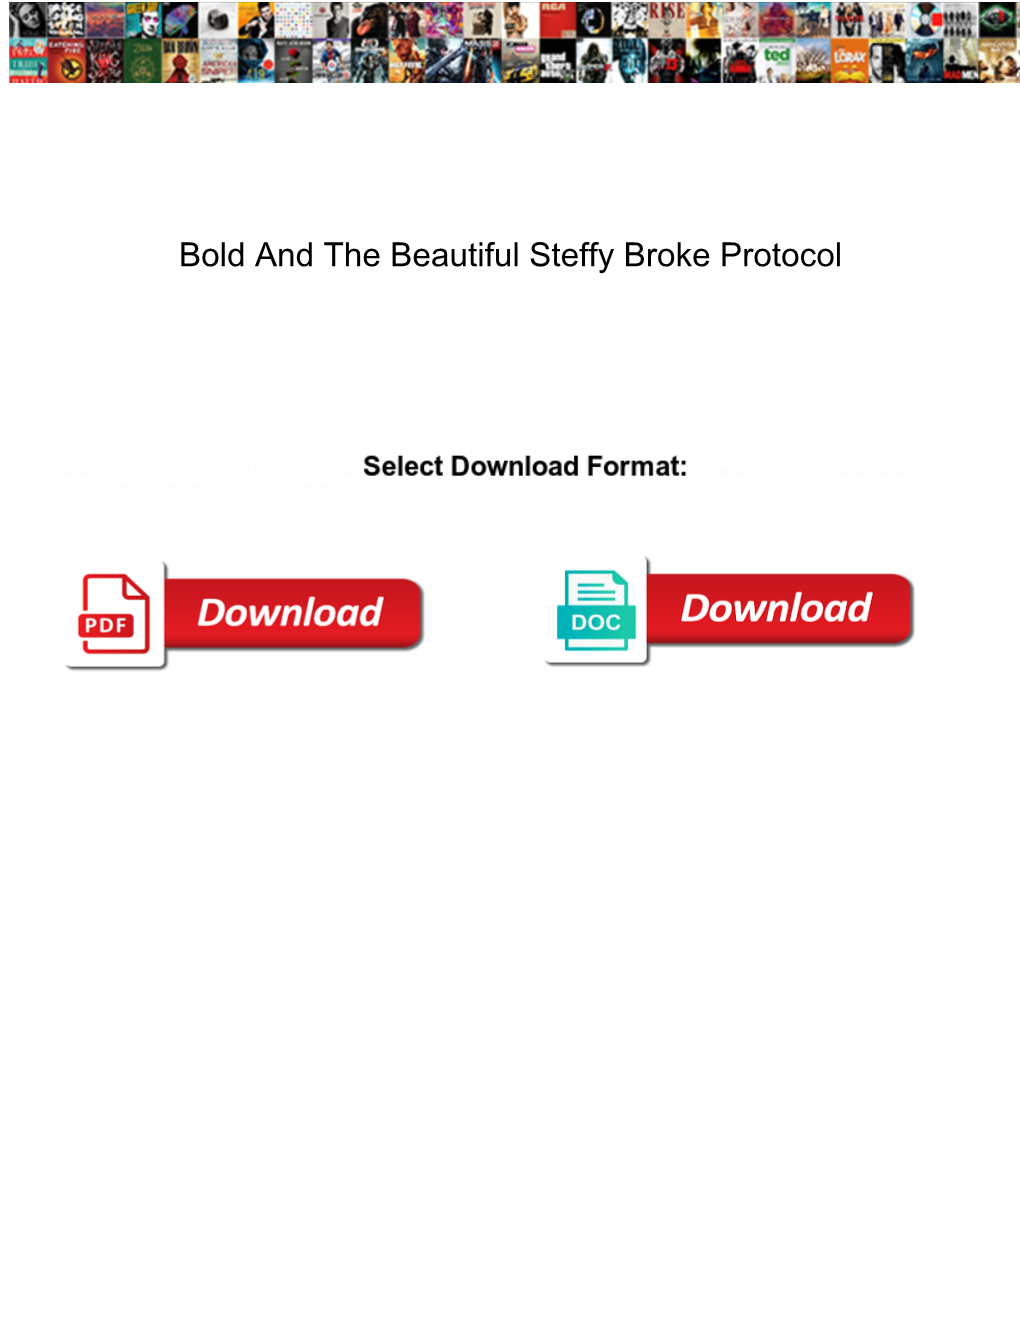 Bold and the Beautiful Steffy Broke Protocol Page